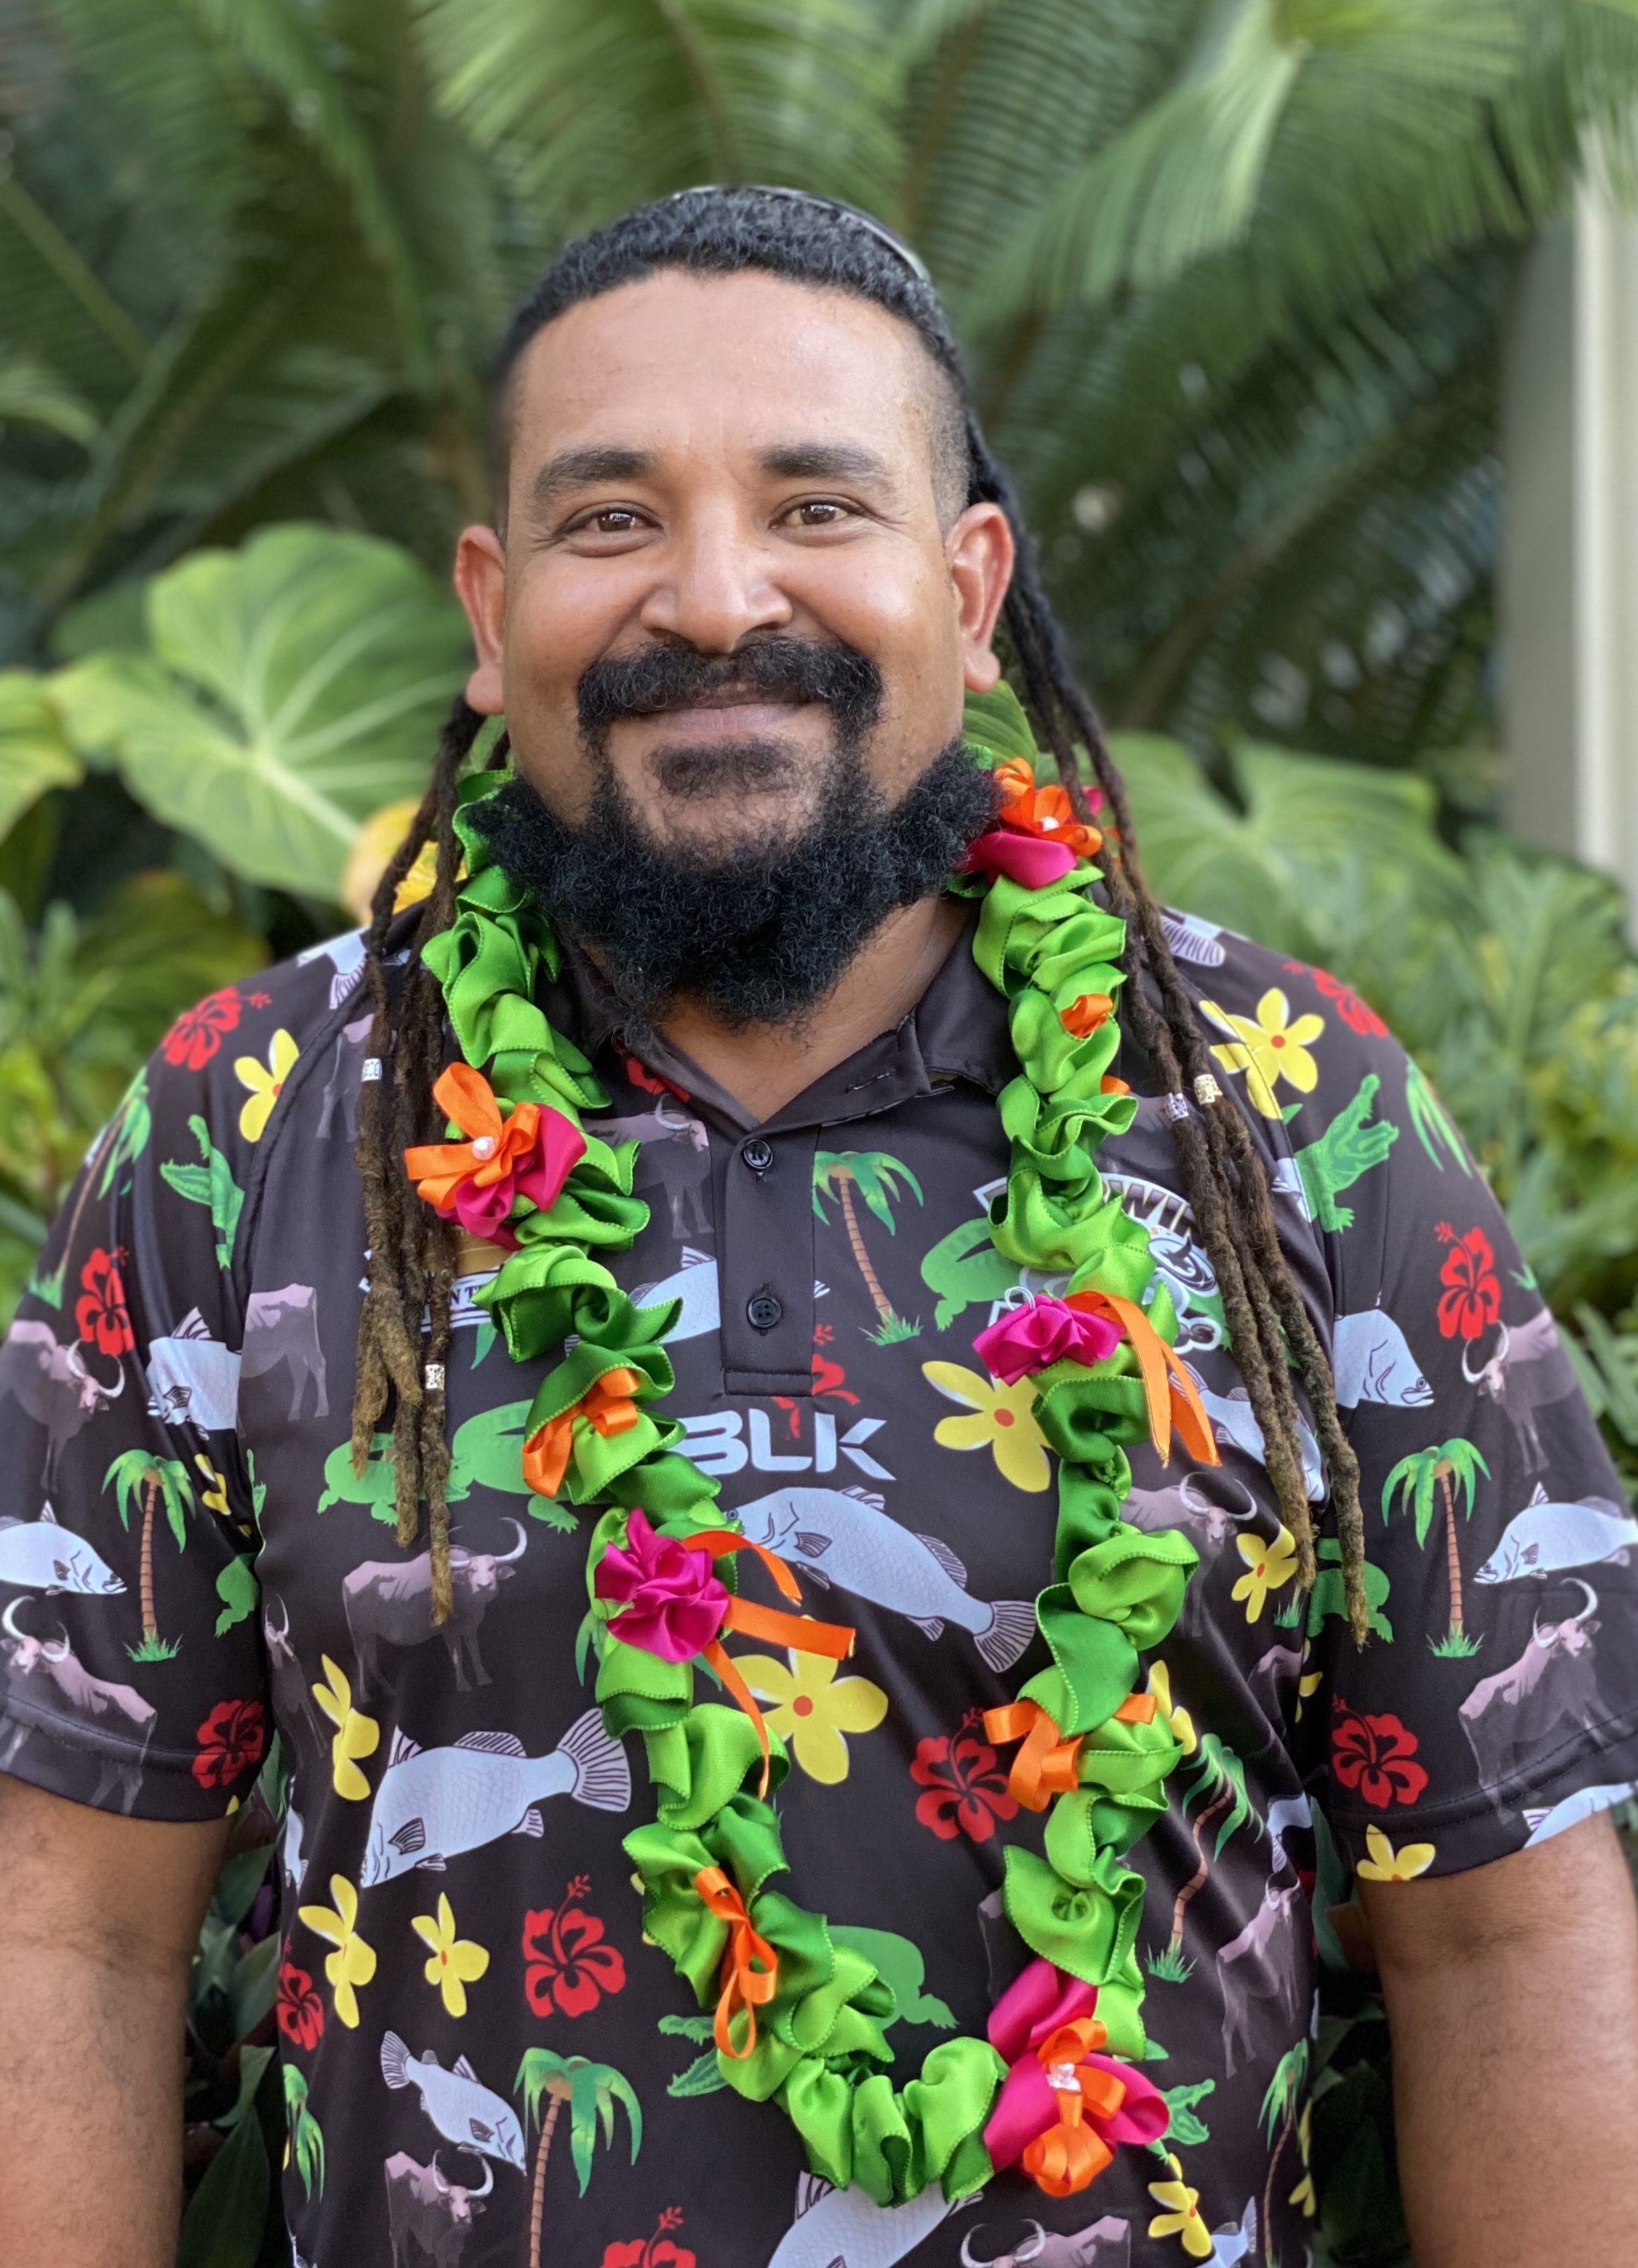 A Torres Strait Islander man wearing a colourful shirt and a lei smiles at the camera.